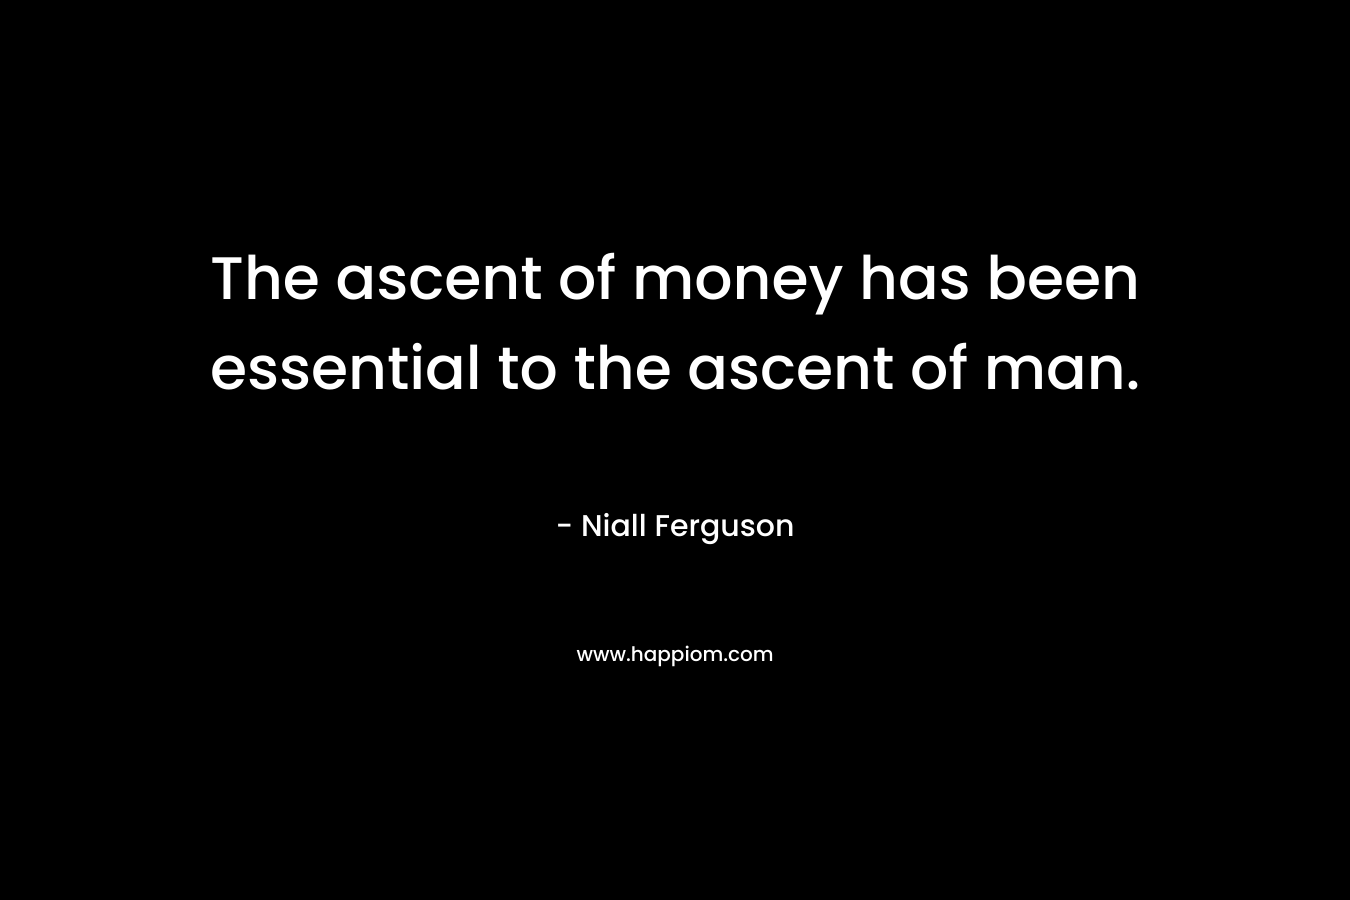 The ascent of money has been essential to the ascent of man. – Niall Ferguson